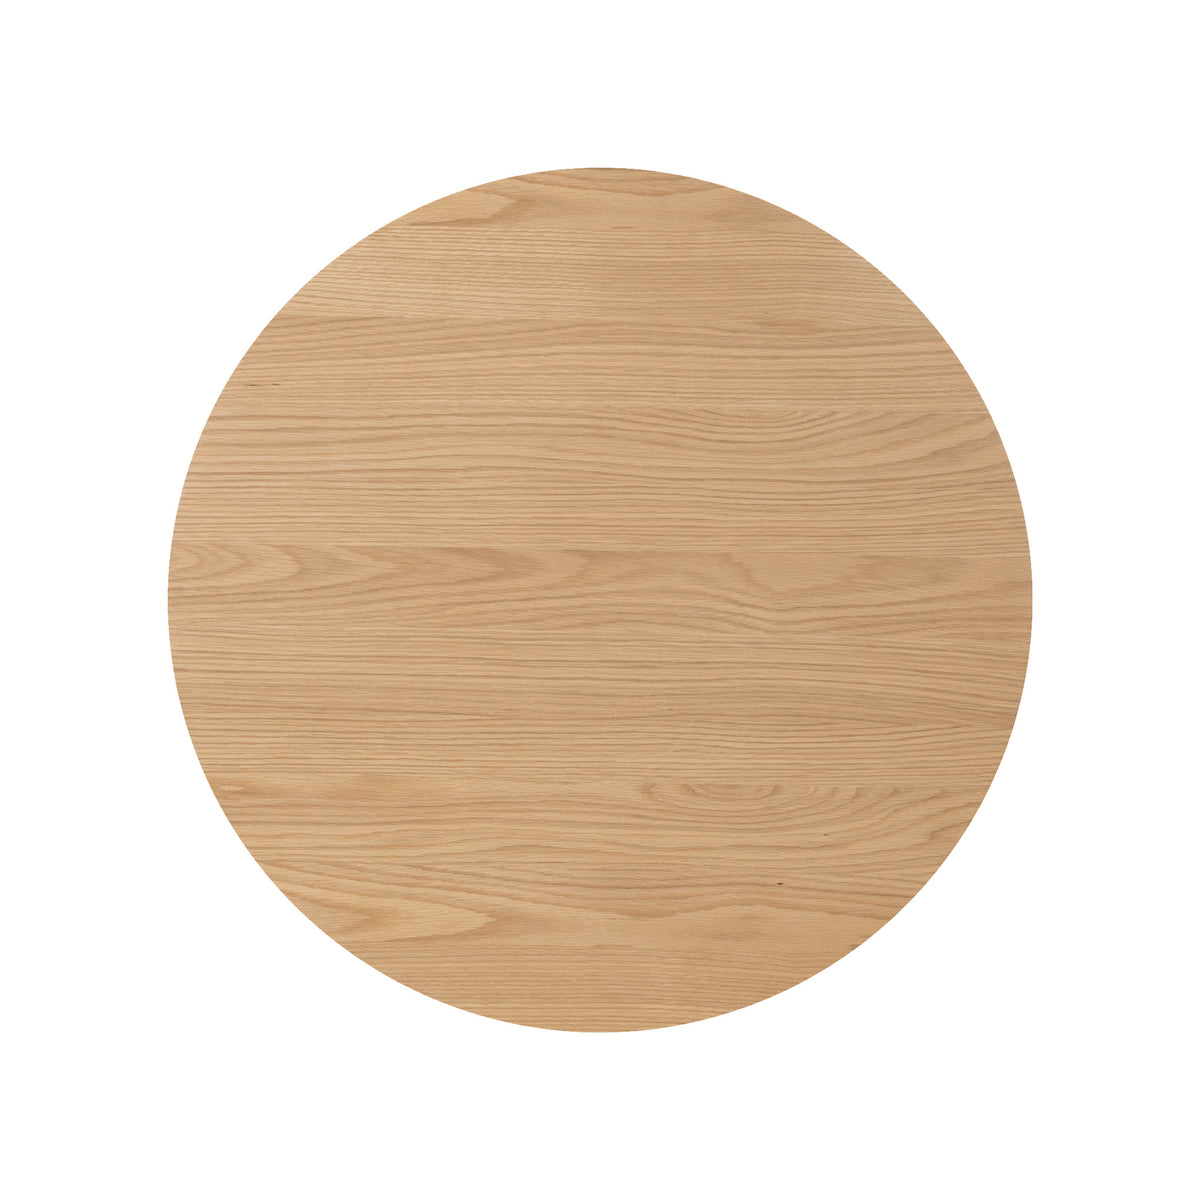 Shorwell Oak Slatted Round Coffee Table